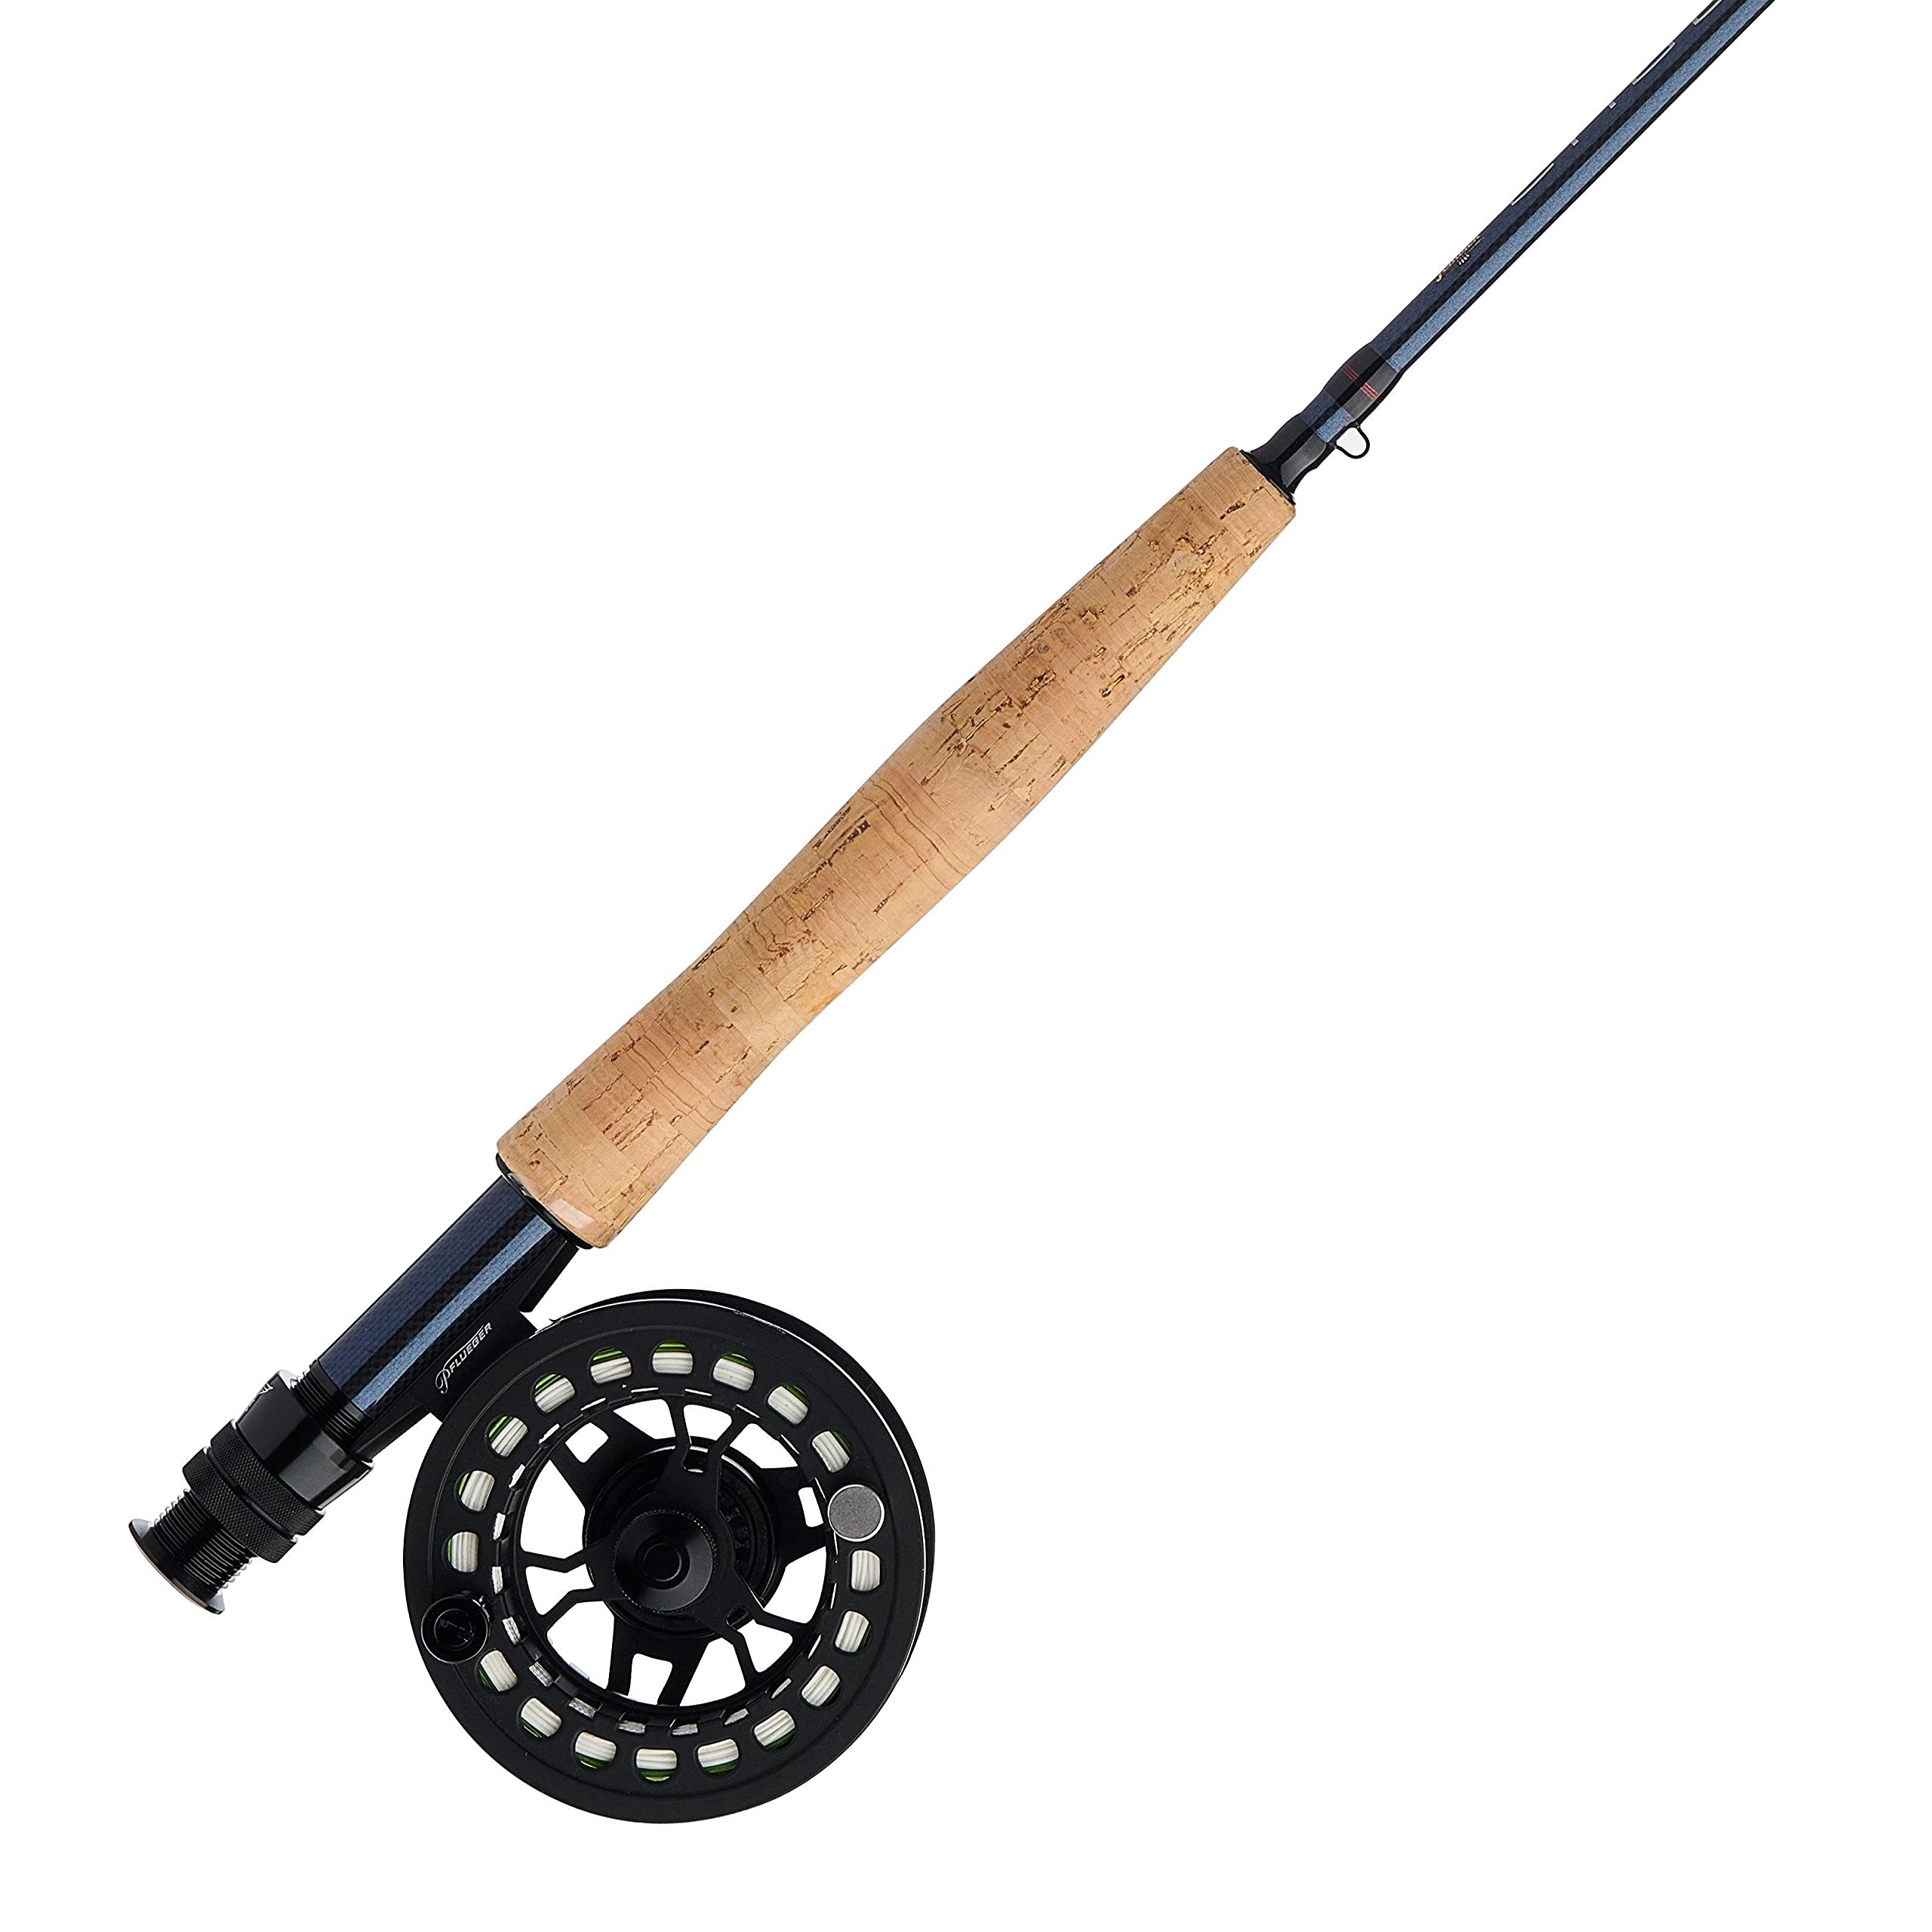 Fenwick Eagle XP Fly Reel and Fishing Rod Outfit 5/6 Size Reel - 9